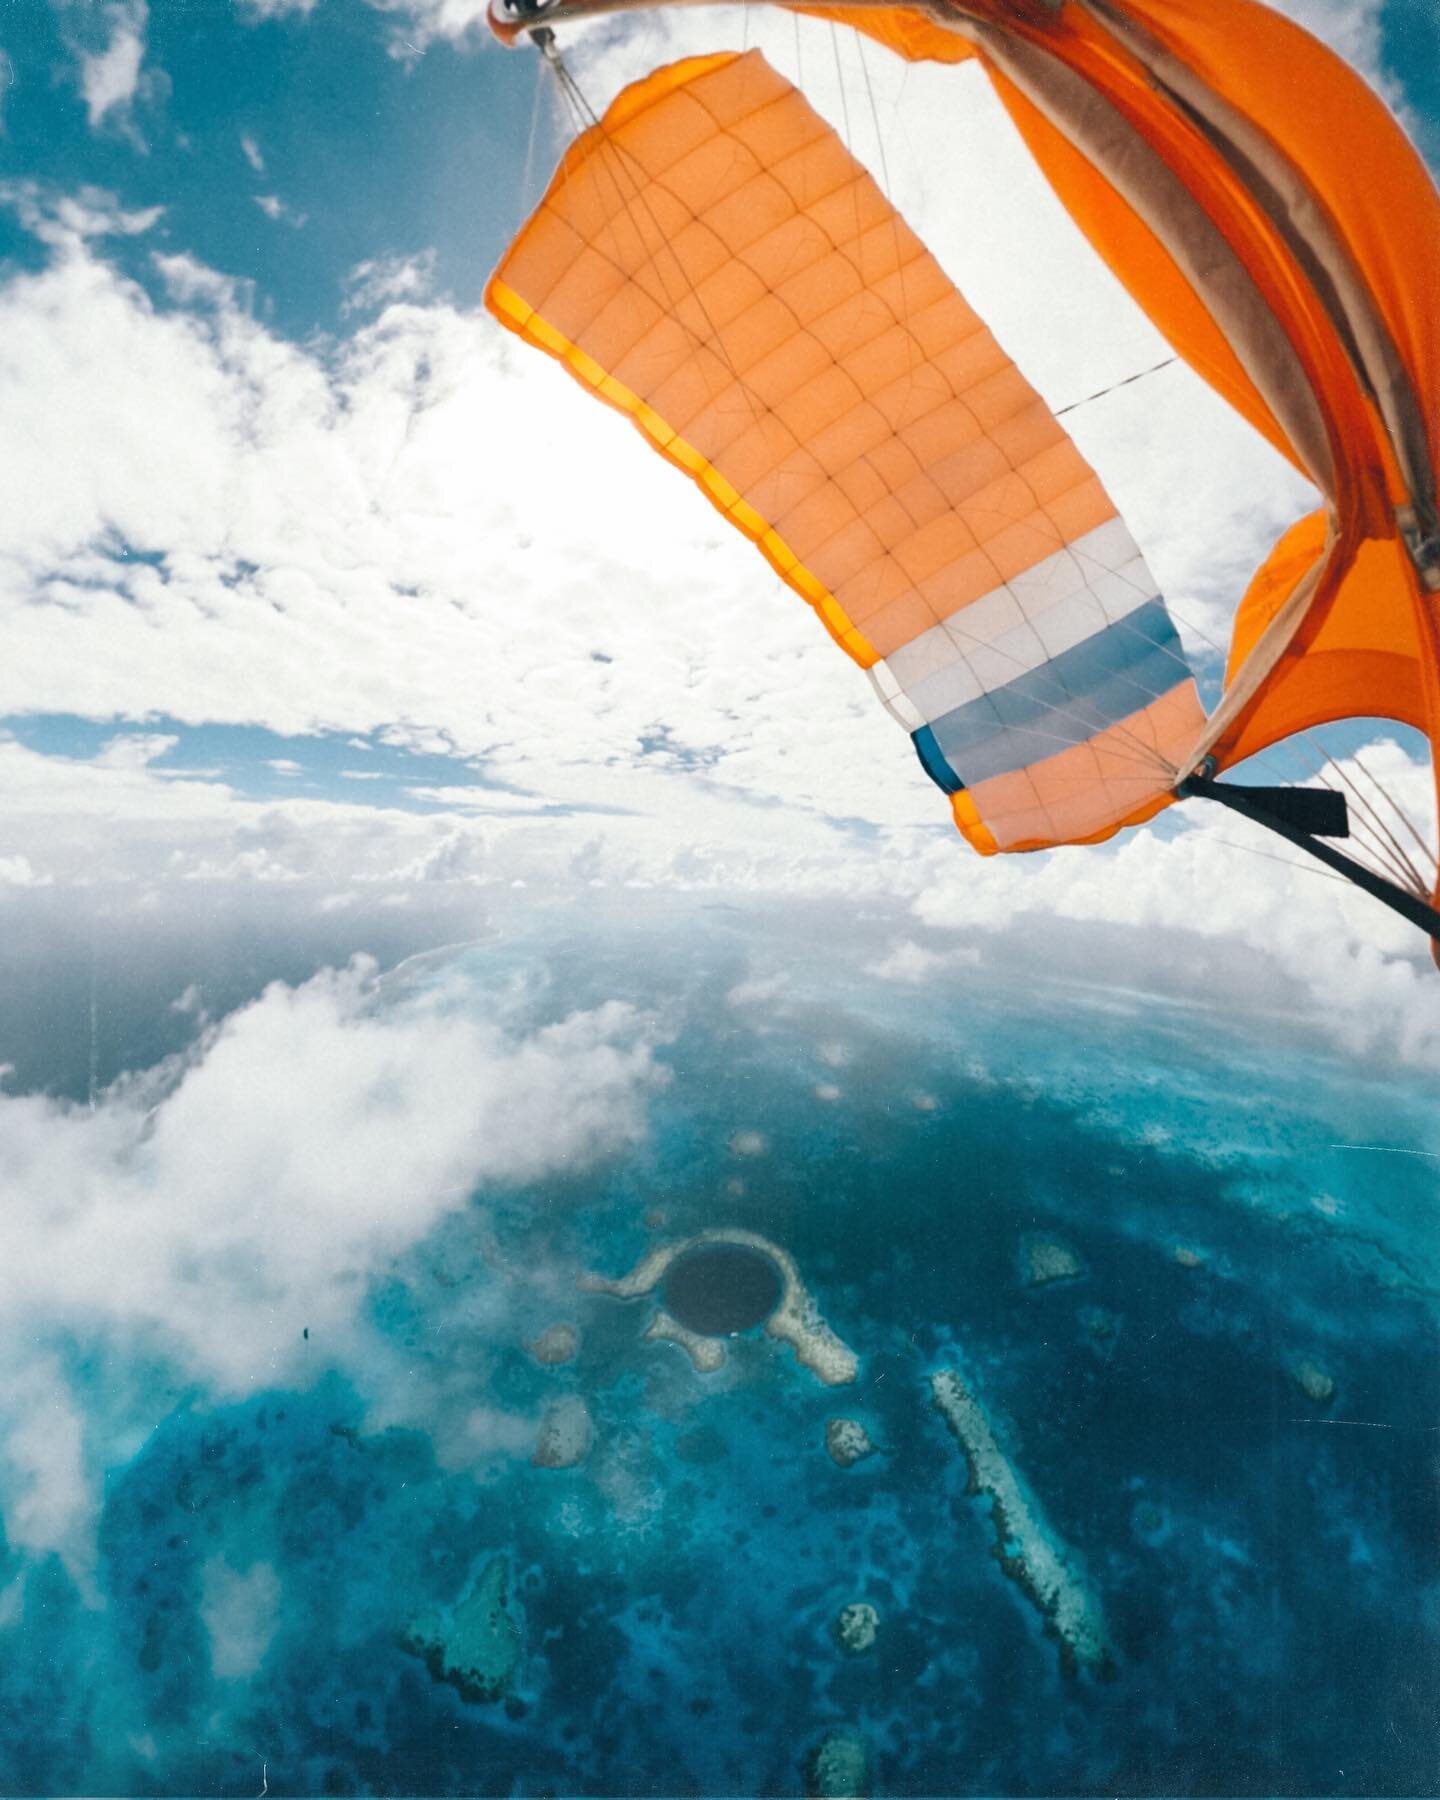 Skydiving into the Blue Hole in Belize! The more time passes the more I realize how lucky I was to get to experience this.. It's not everyday this is your view under canopy.  Huge shoutout to @uprising for one of the peak experiences of my life 🖤